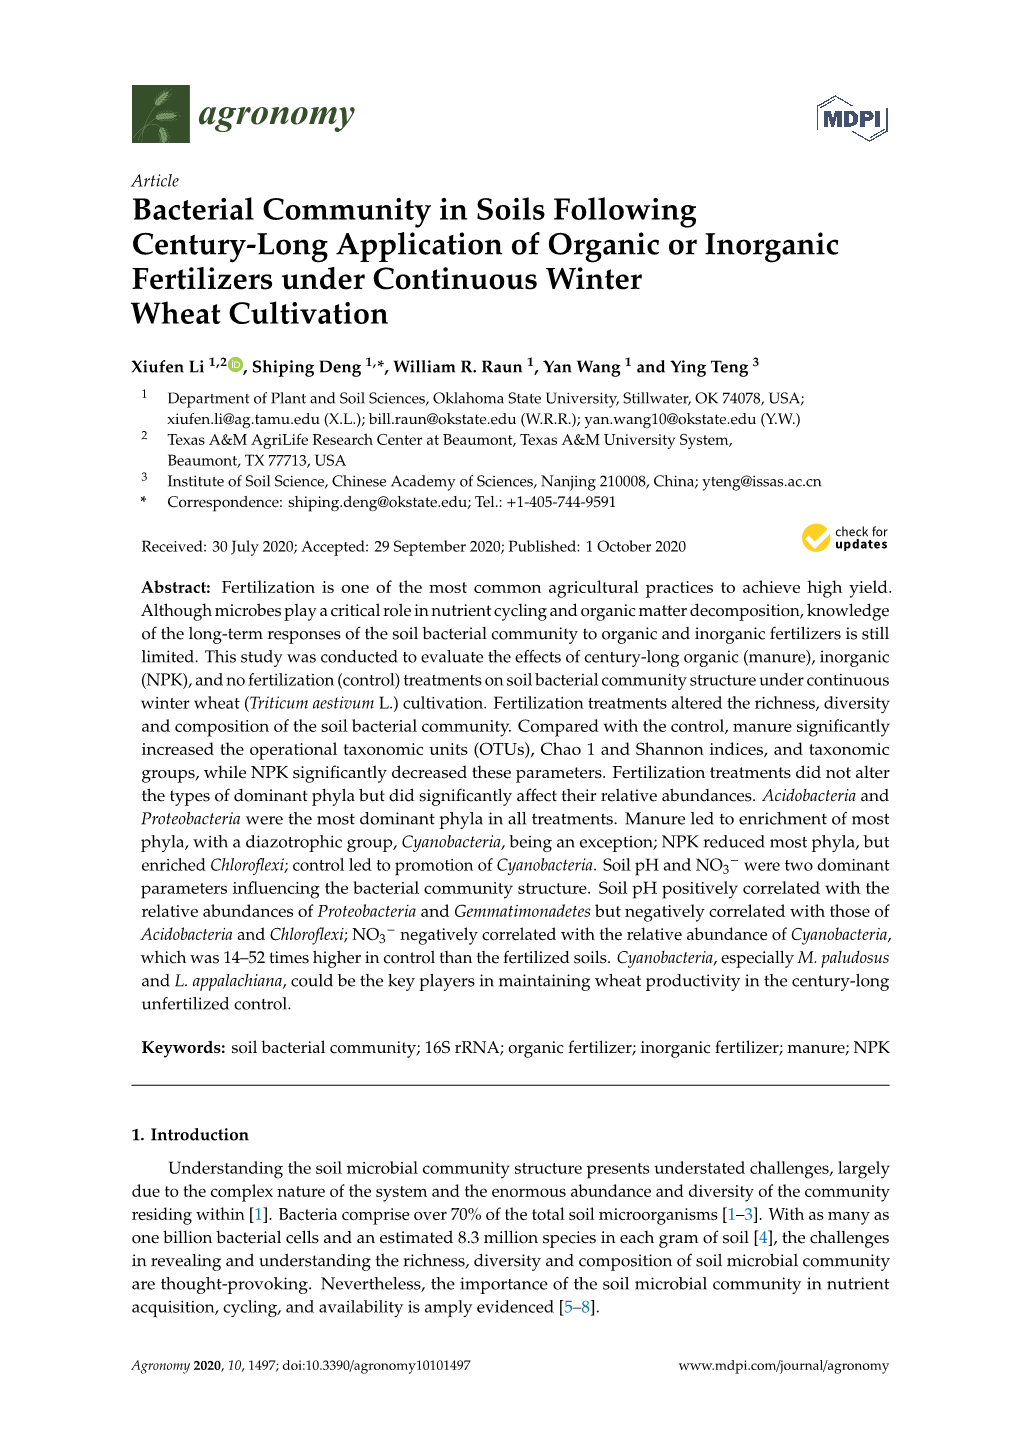 Bacterial Community in Soils Following Century-Long Application of Organic Or Inorganic Fertilizers Under Continuous Winter Wheat Cultivation